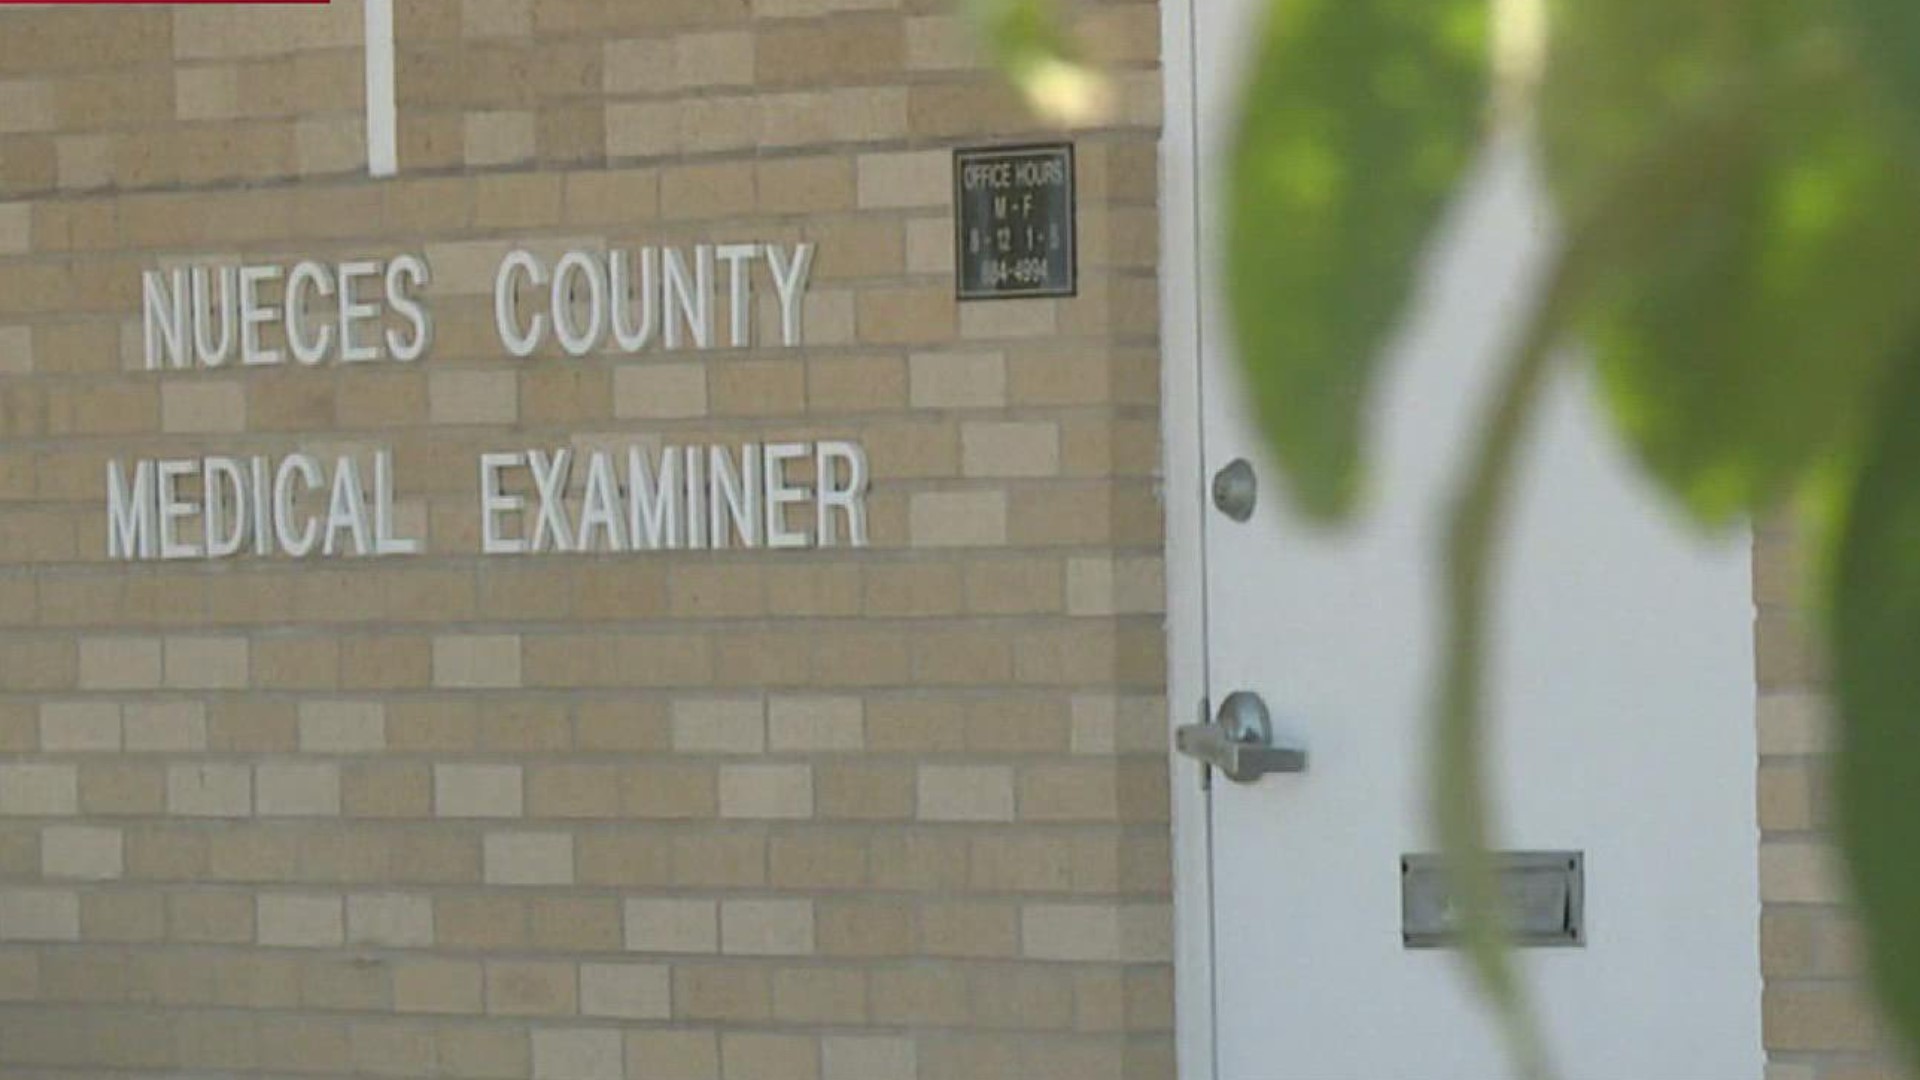 Shaker has served as a medical examiner forensic pathologist for 35 years. Eight of those were spent here in Nueces County.